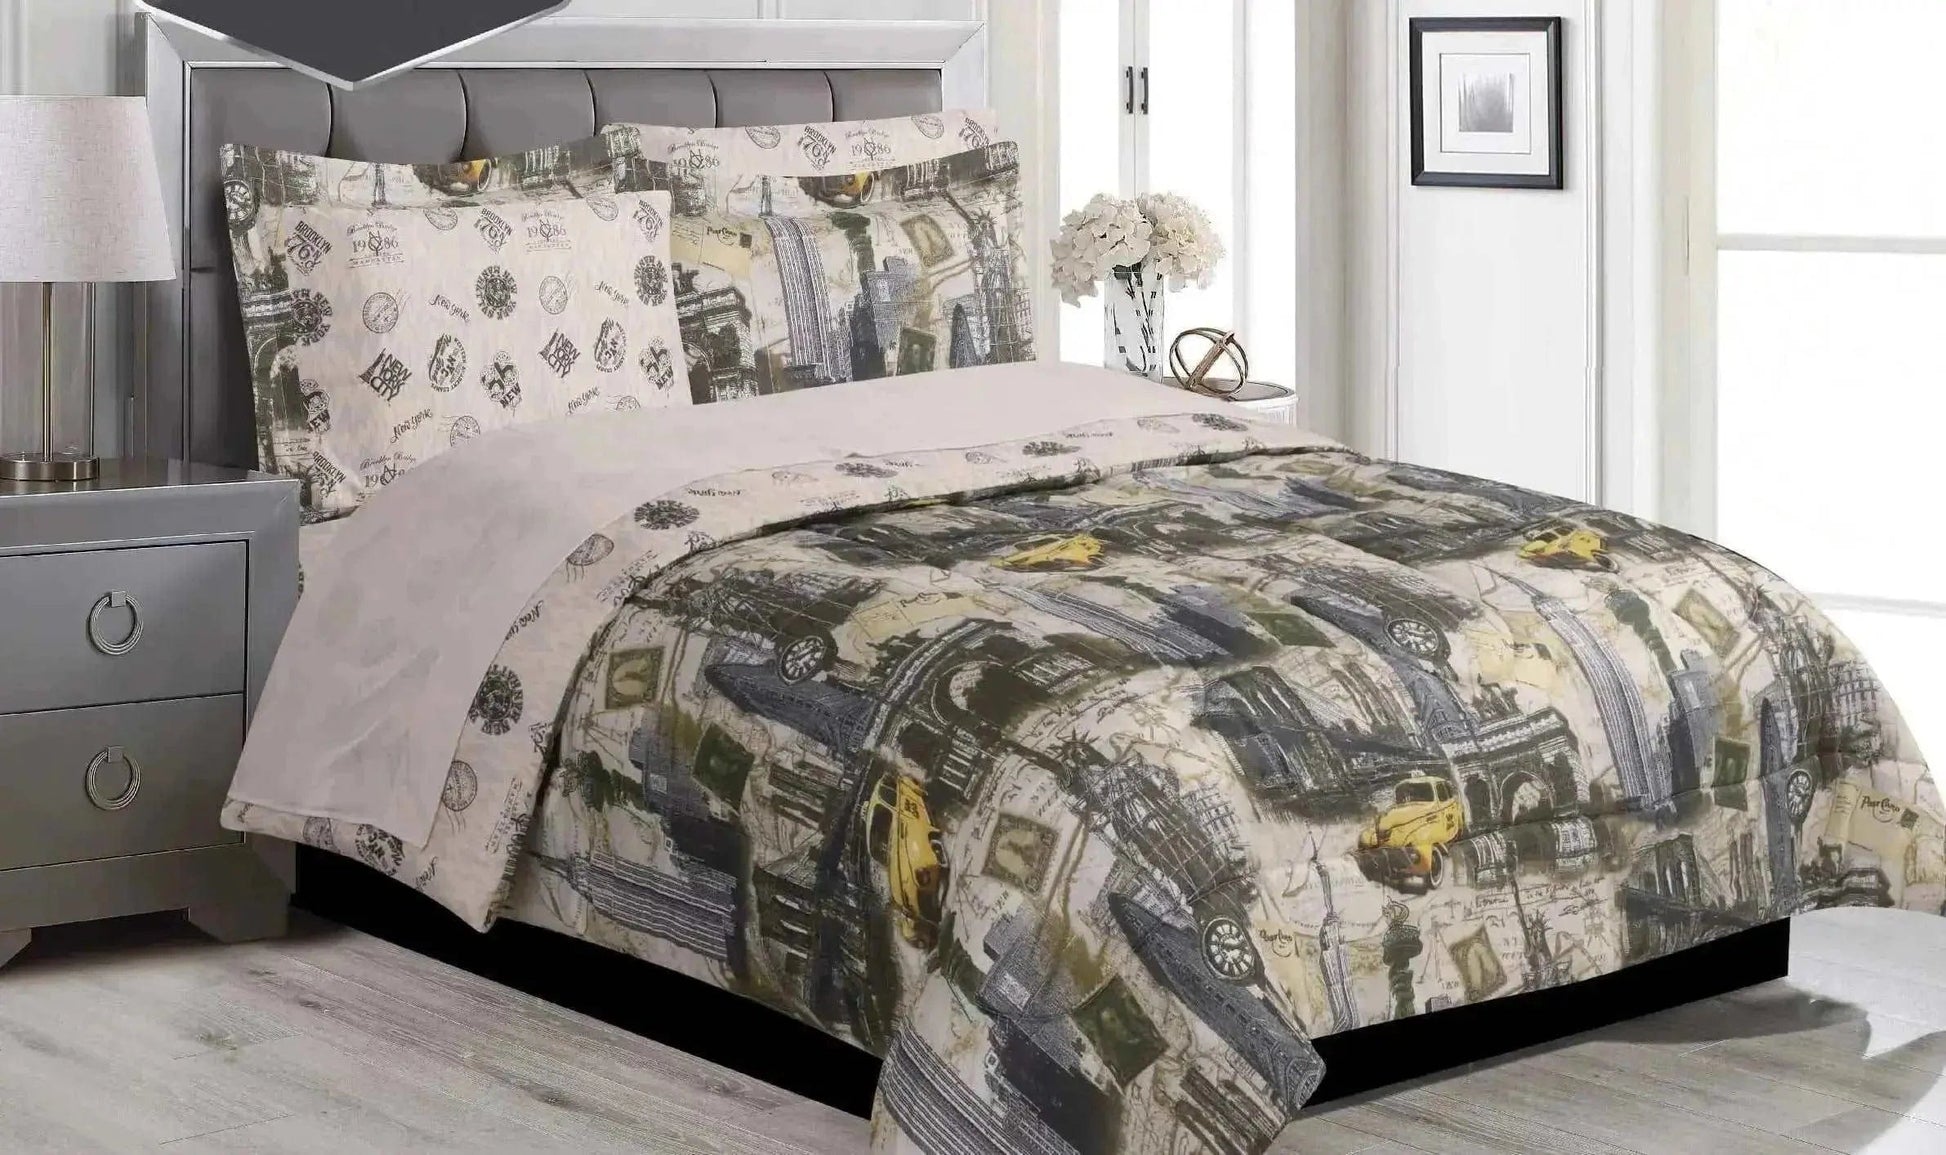 Linen World Comforter Set King / New York City 7 Piece Bed in a Bag King or Queen Sized